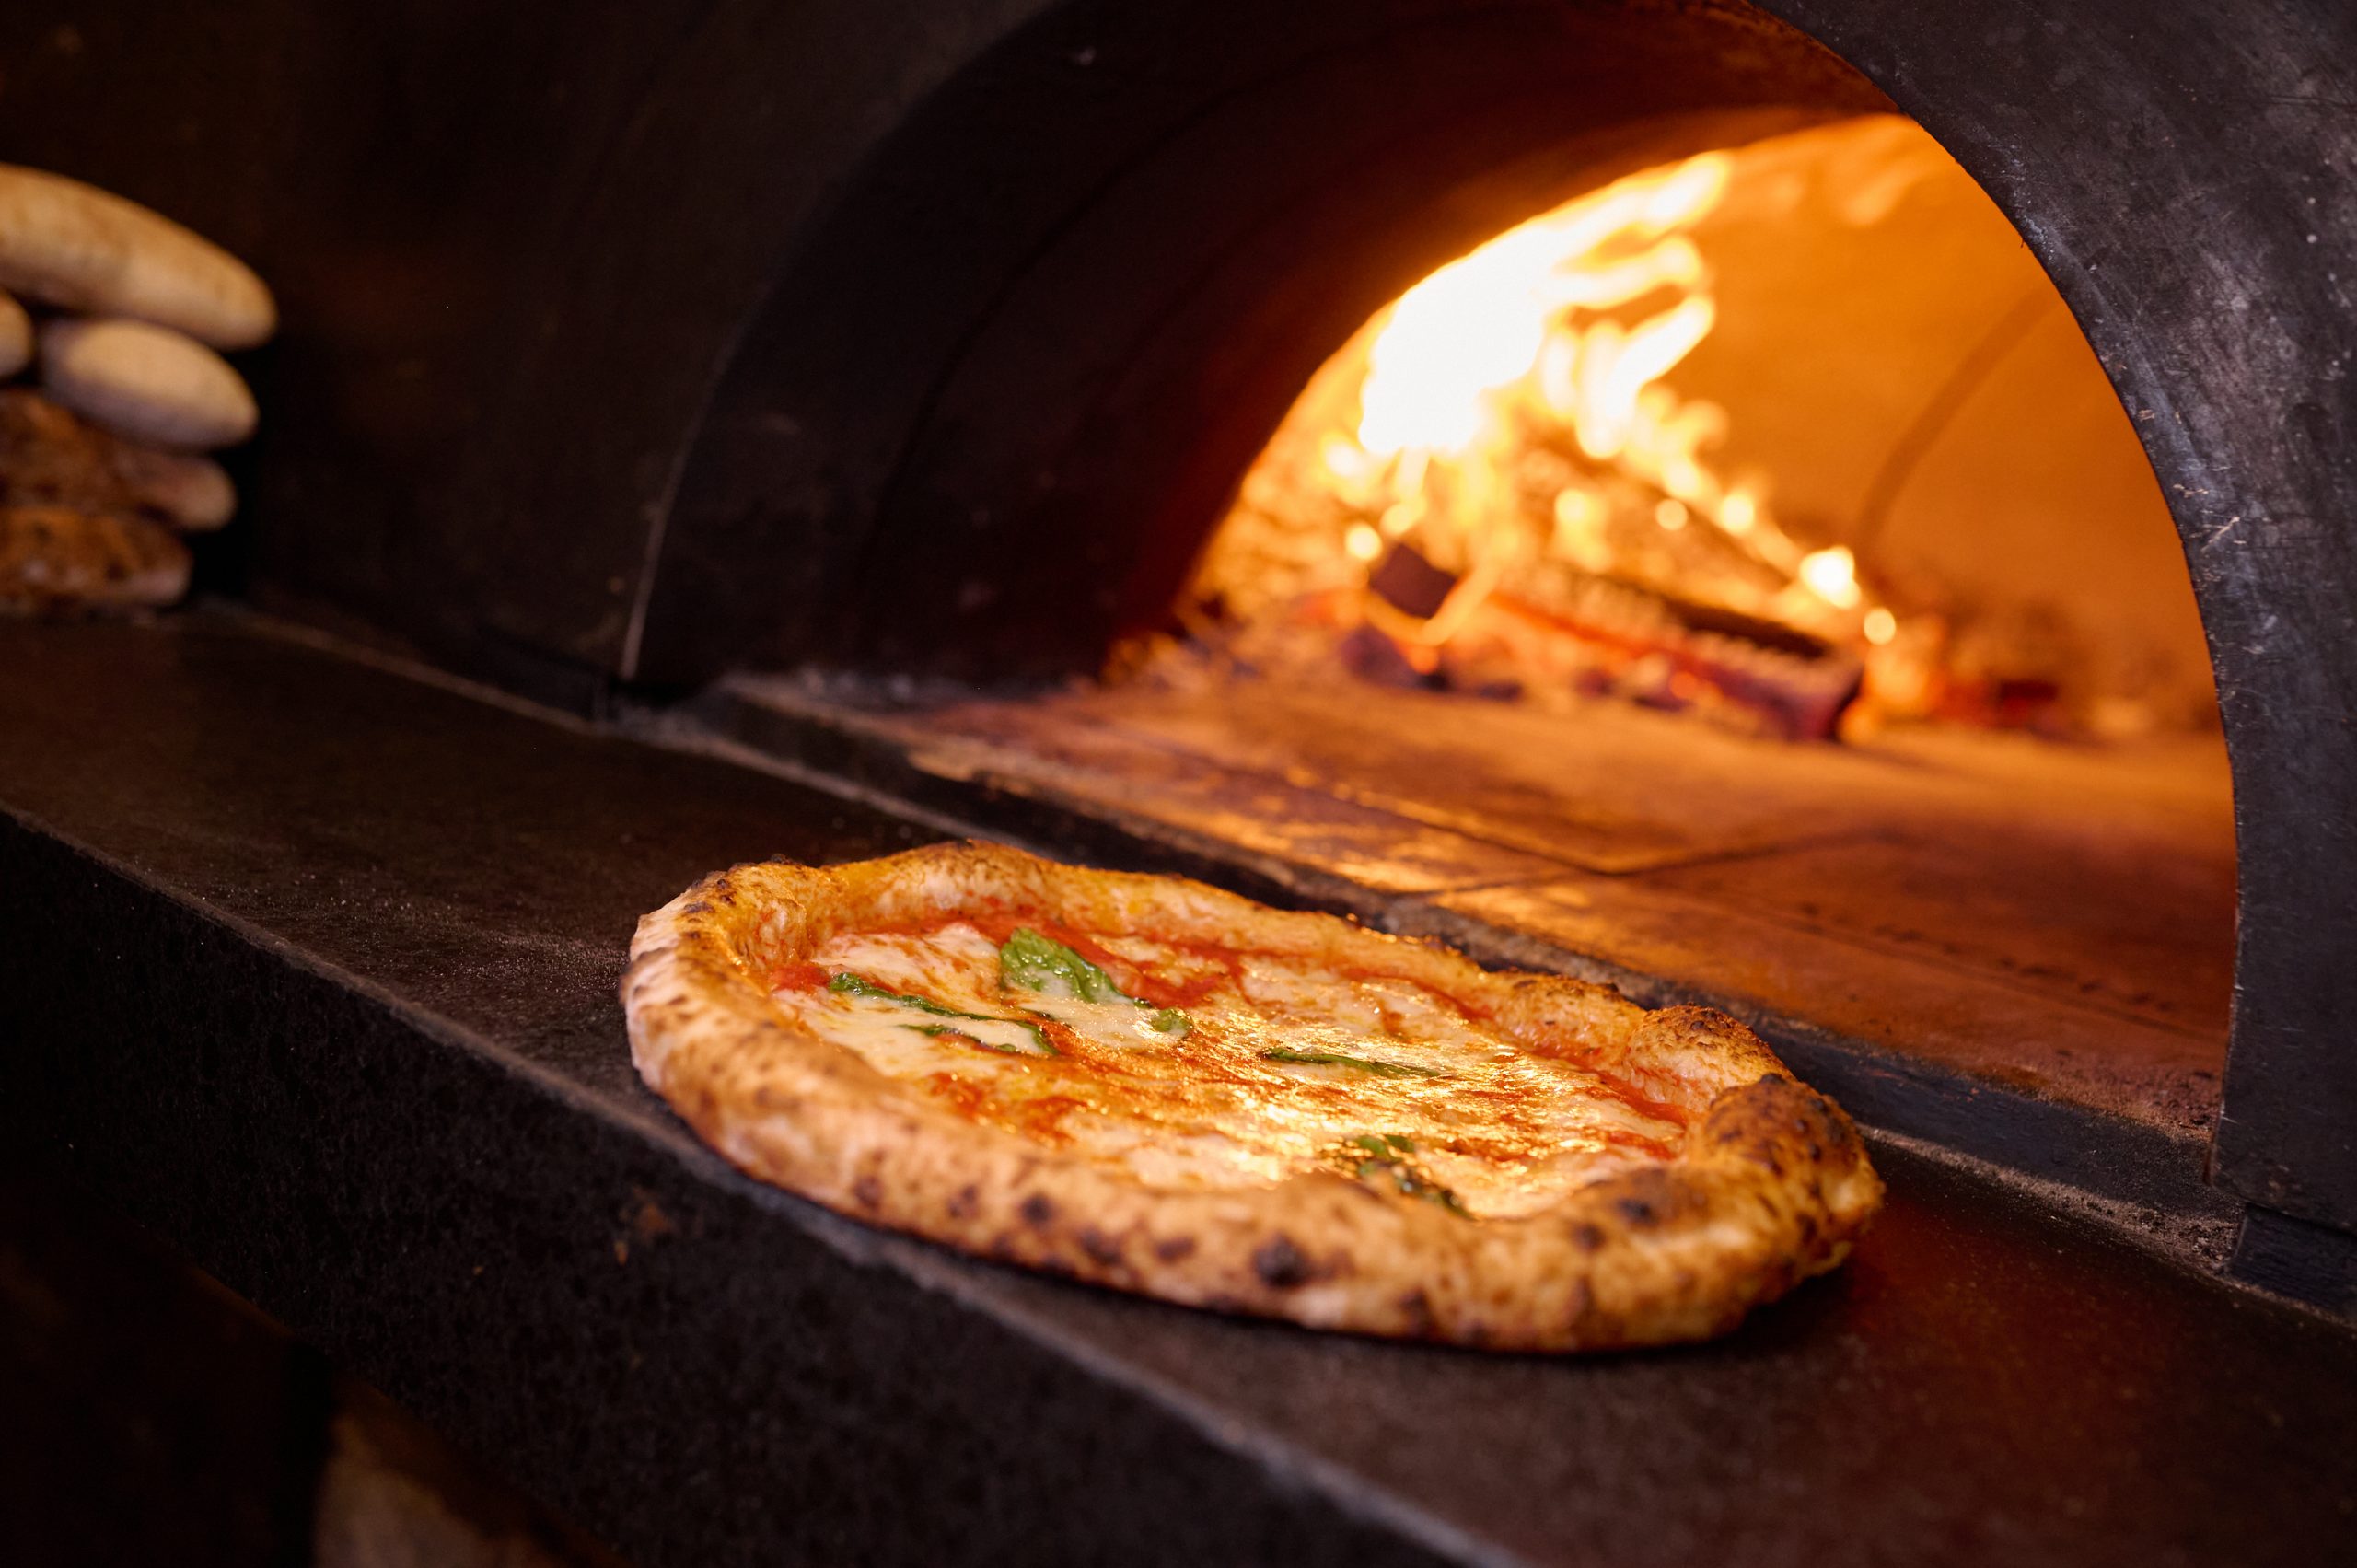 Ironside Pizza's signature dish, a pizza, cooked on a stone oven at one of the best Italian restaurants in Miami.